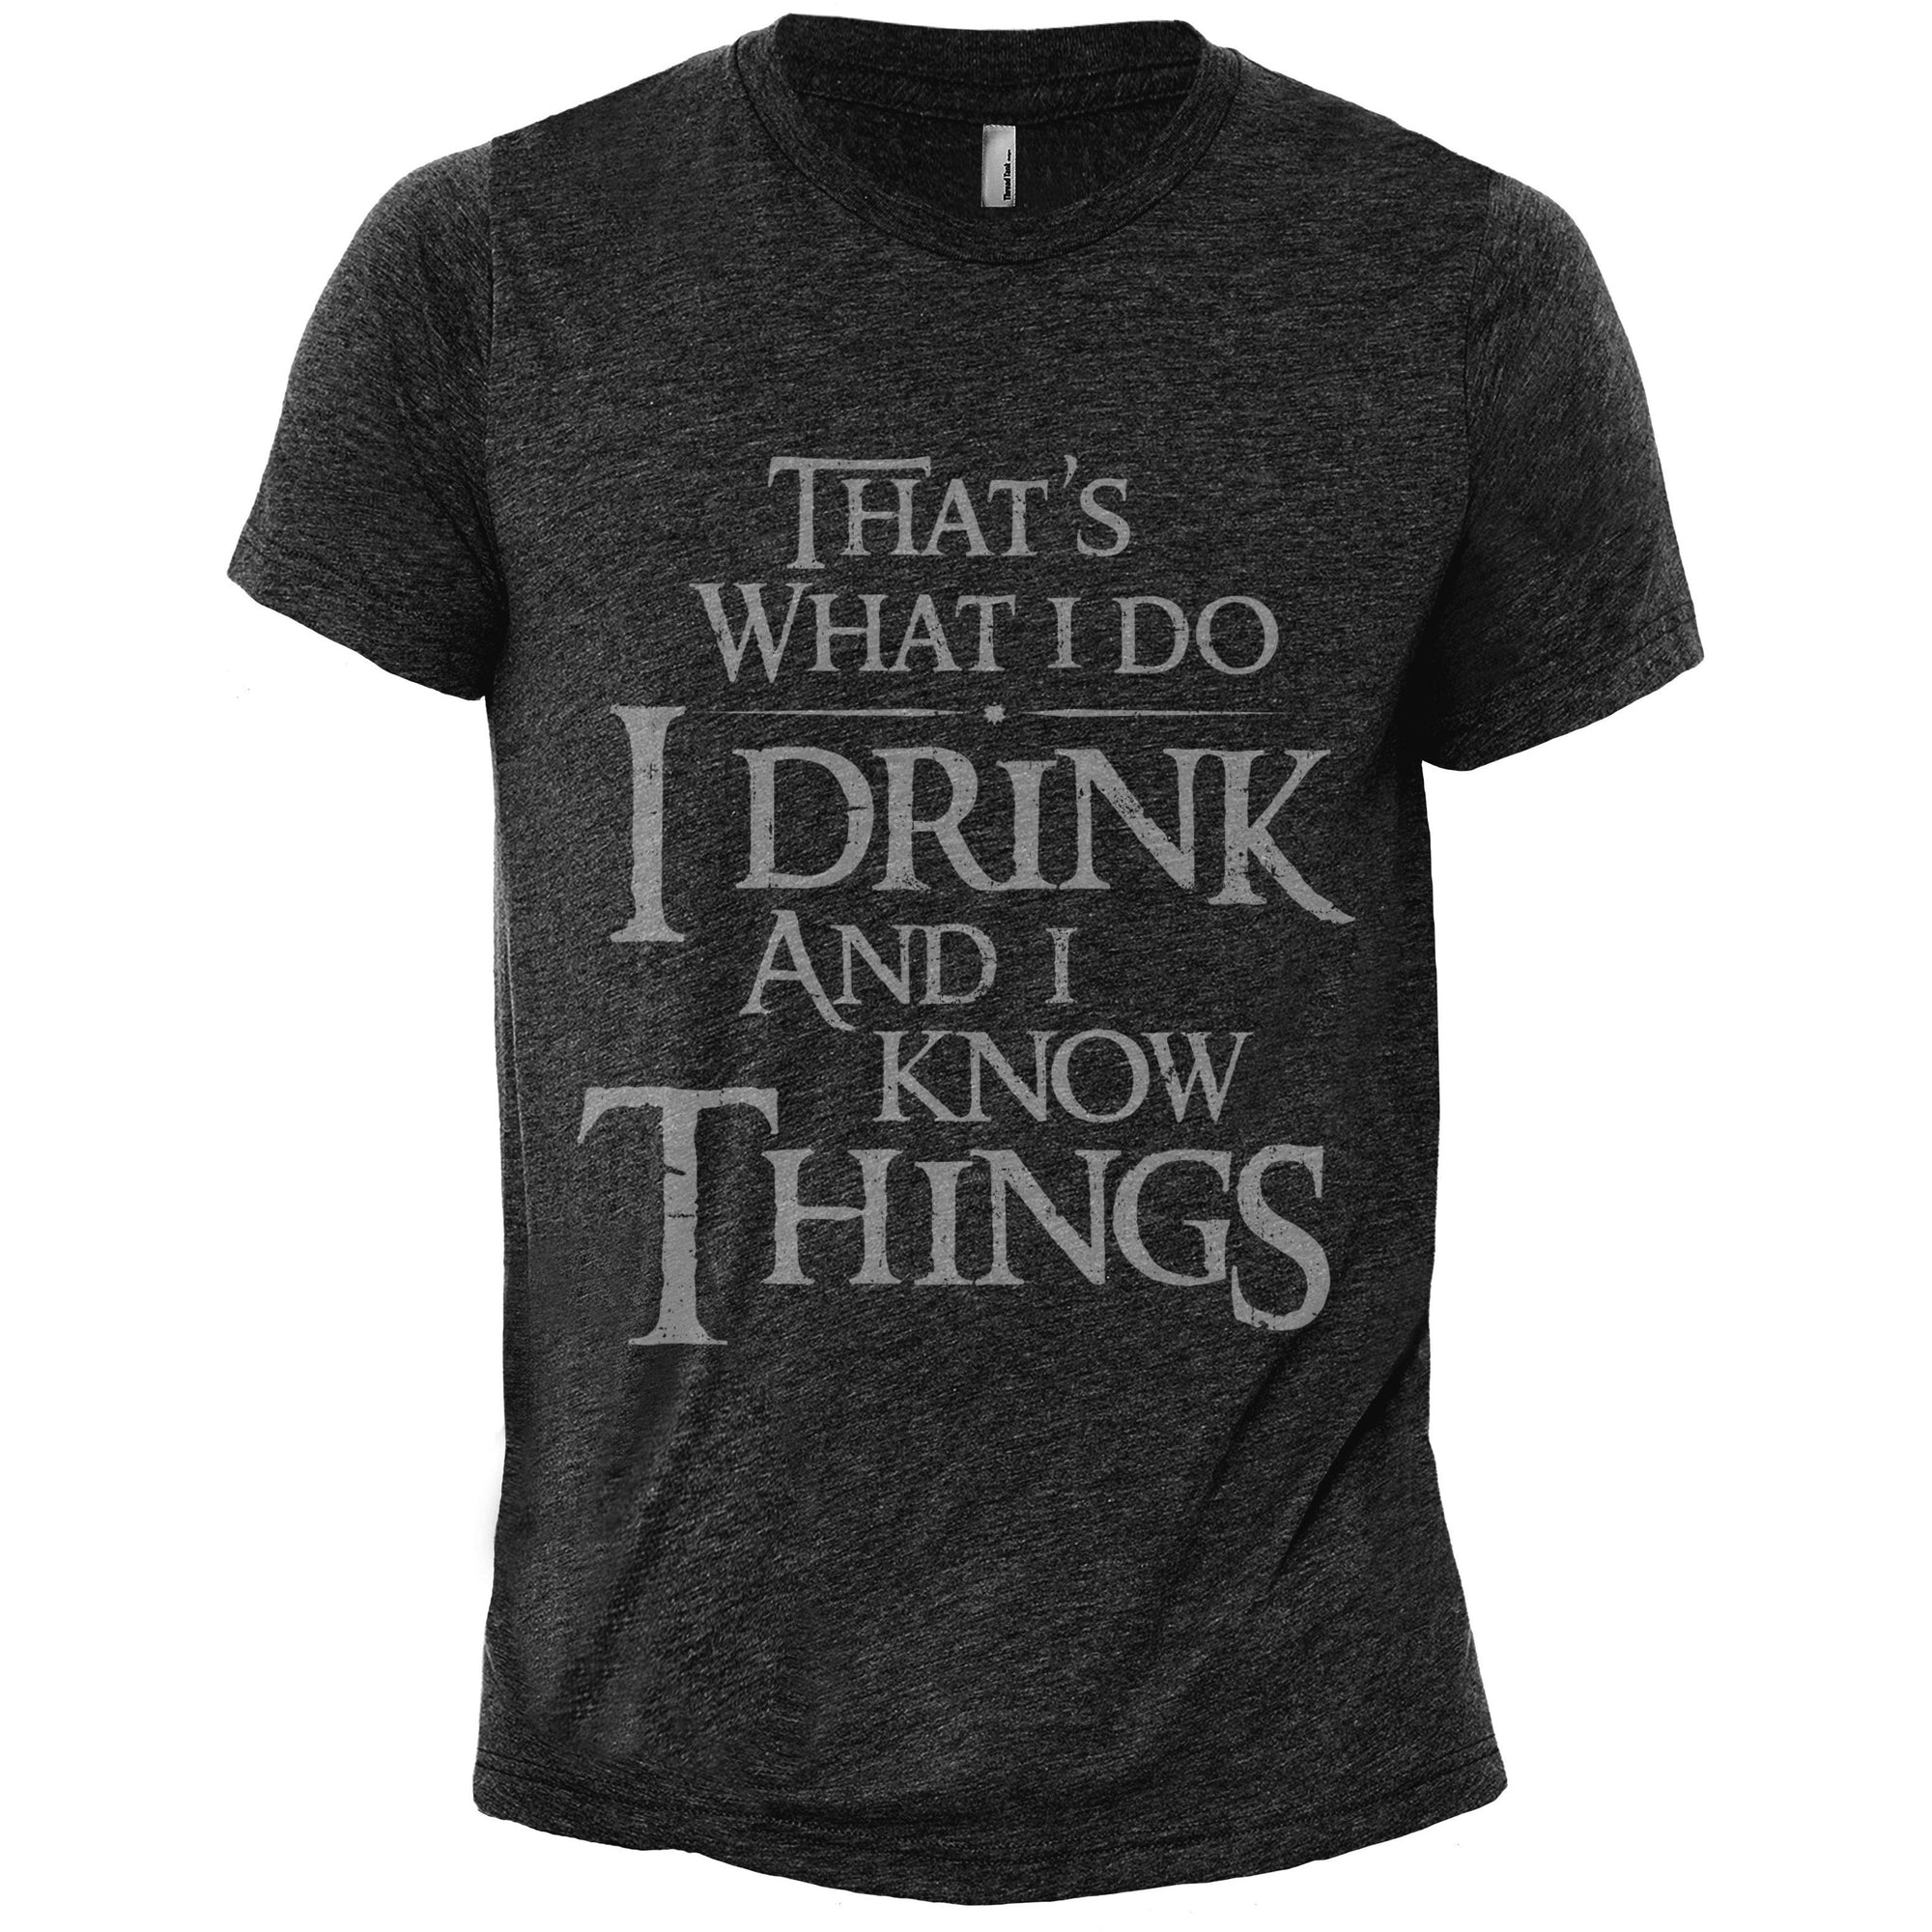 Thats What I Do I Drink And I Know Things Heather Grey Printed Graphic Men's Crew T-Shirt Tee